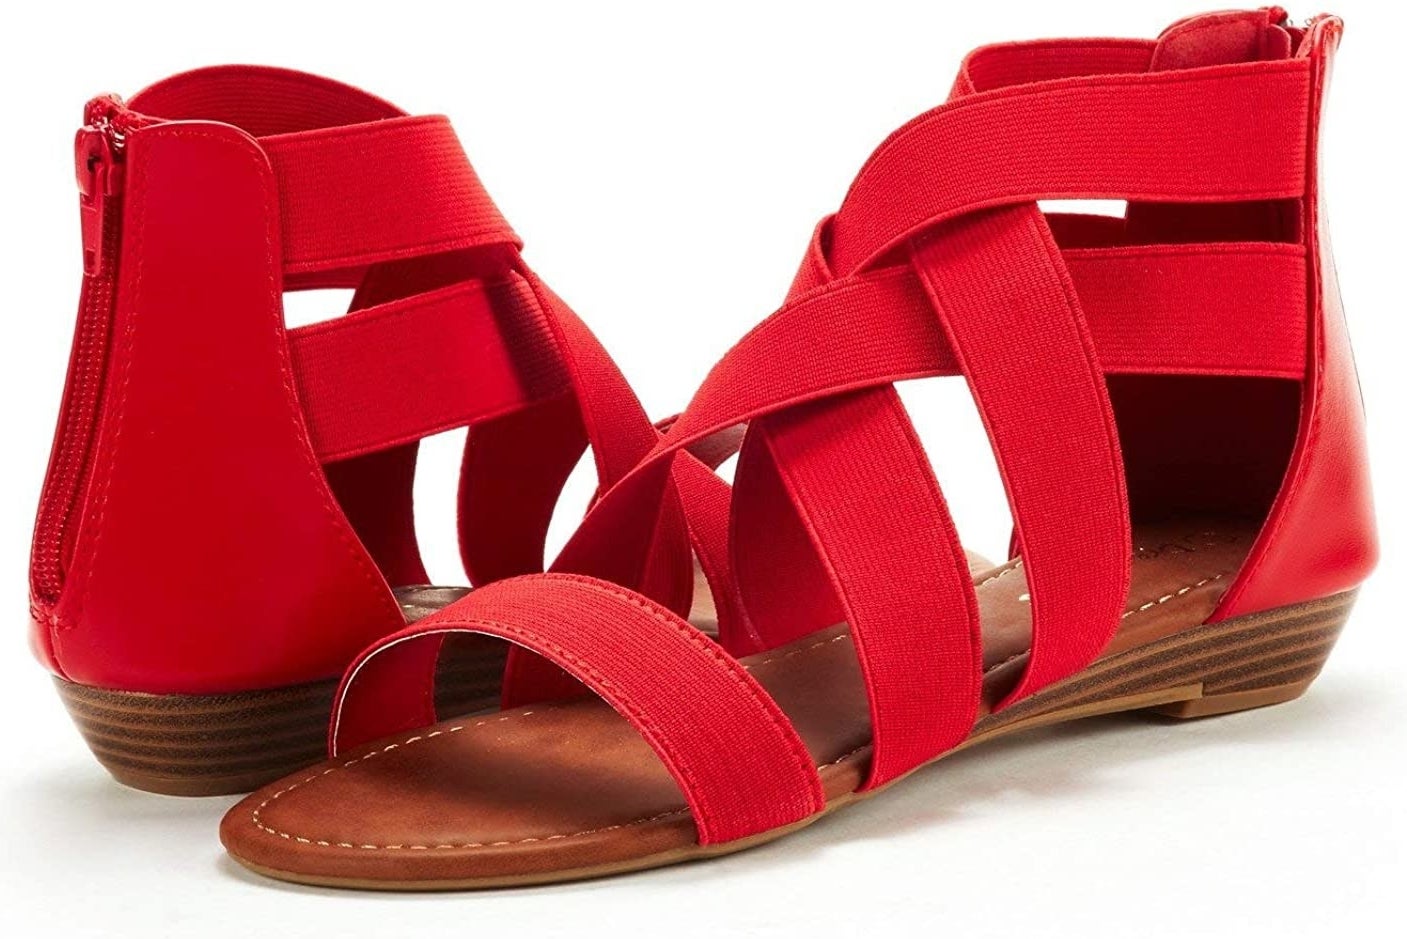 32 Cute Pairs Of Sandals